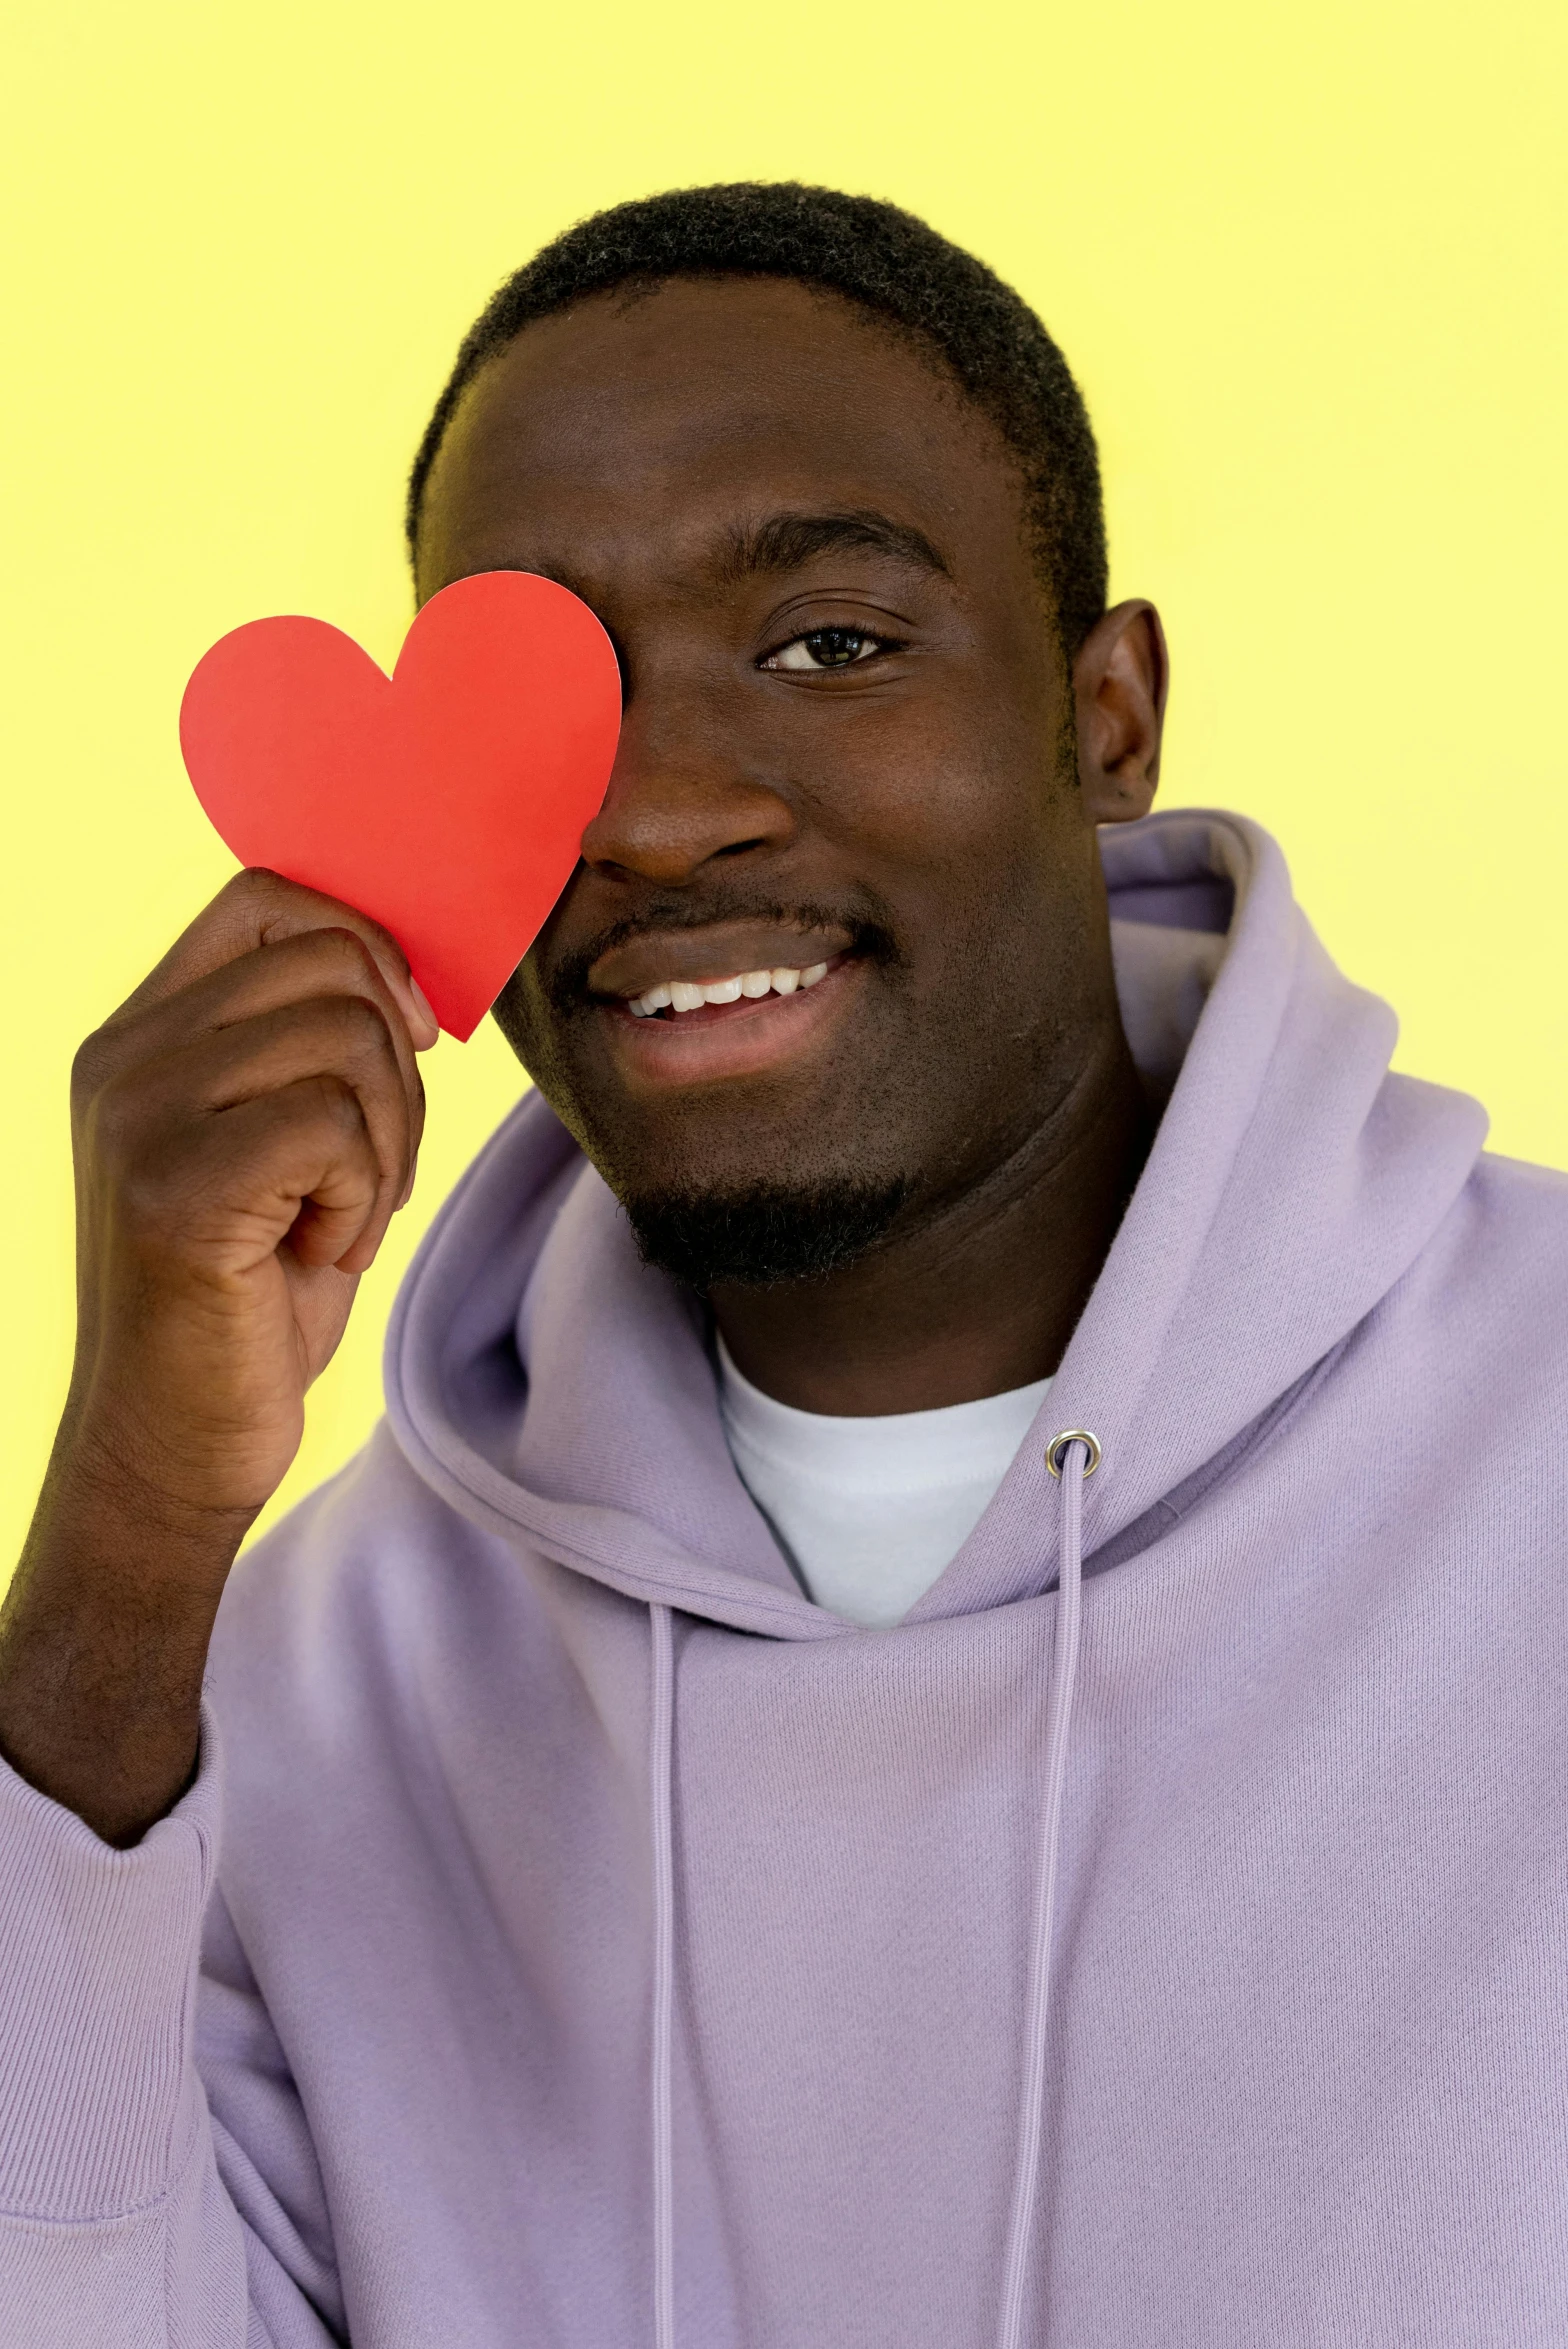 a man holding up a heart shaped paper